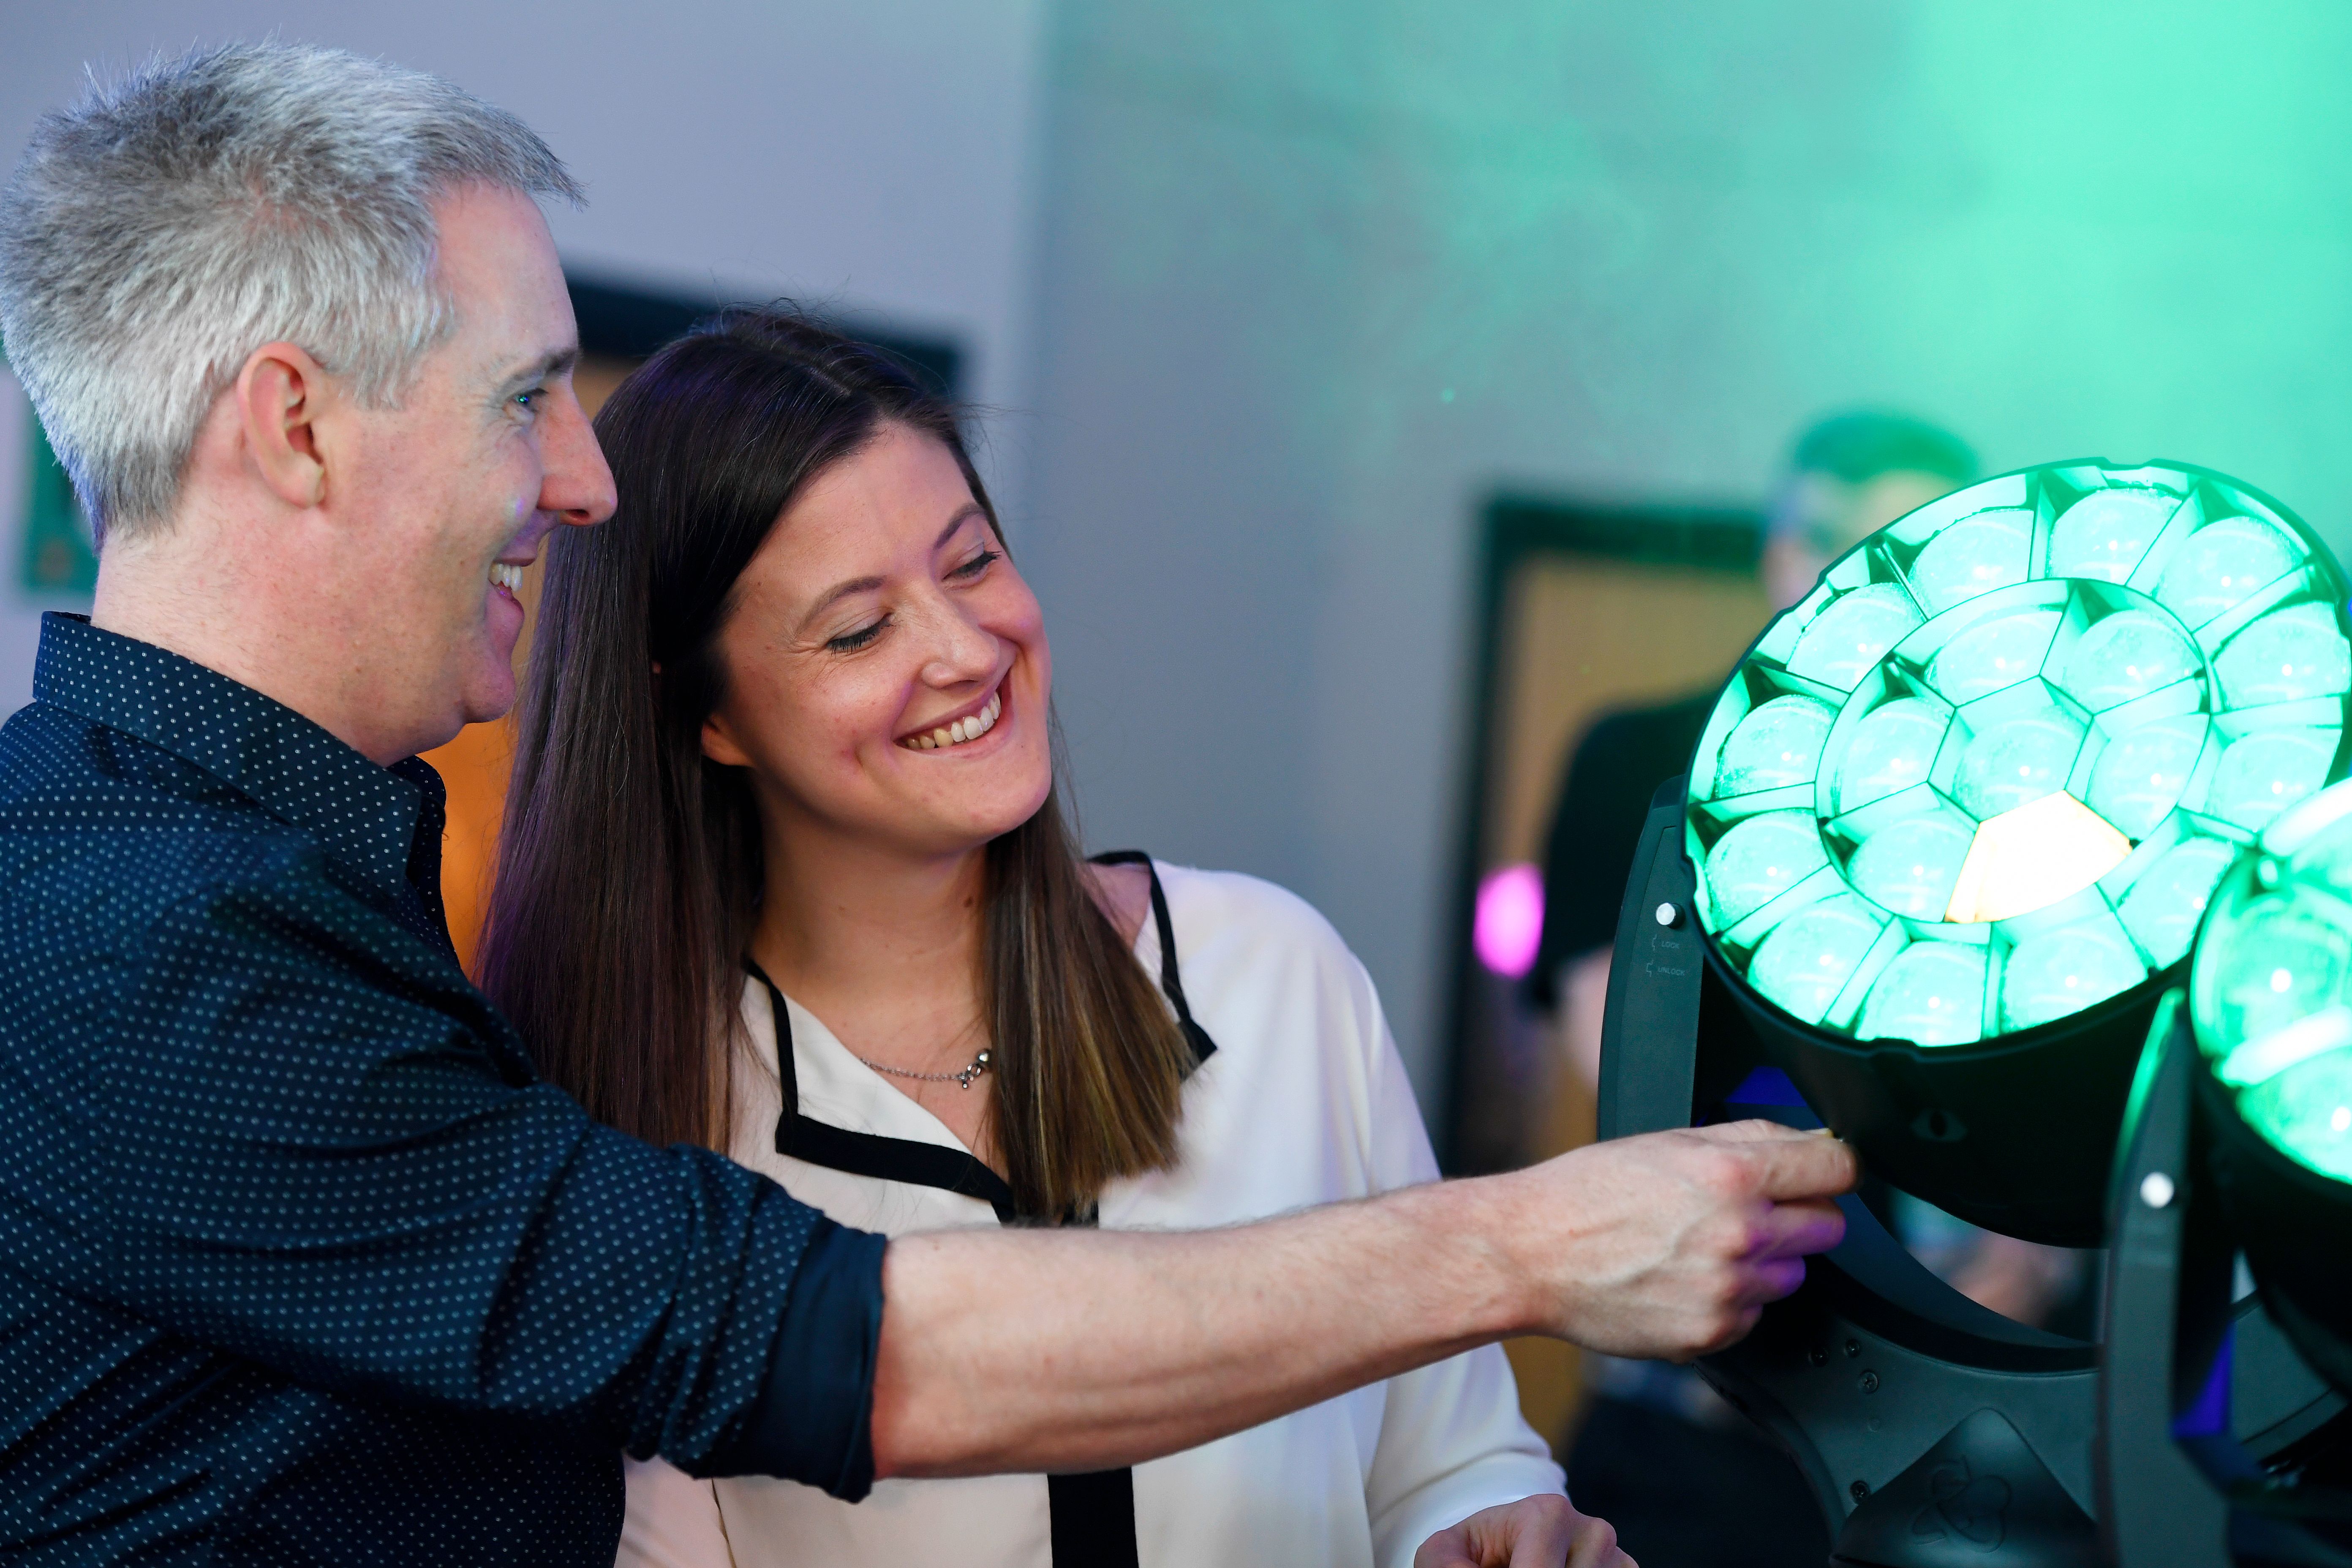 Man and woman smiling at a professional green light at a PLASA trade show in Leeds